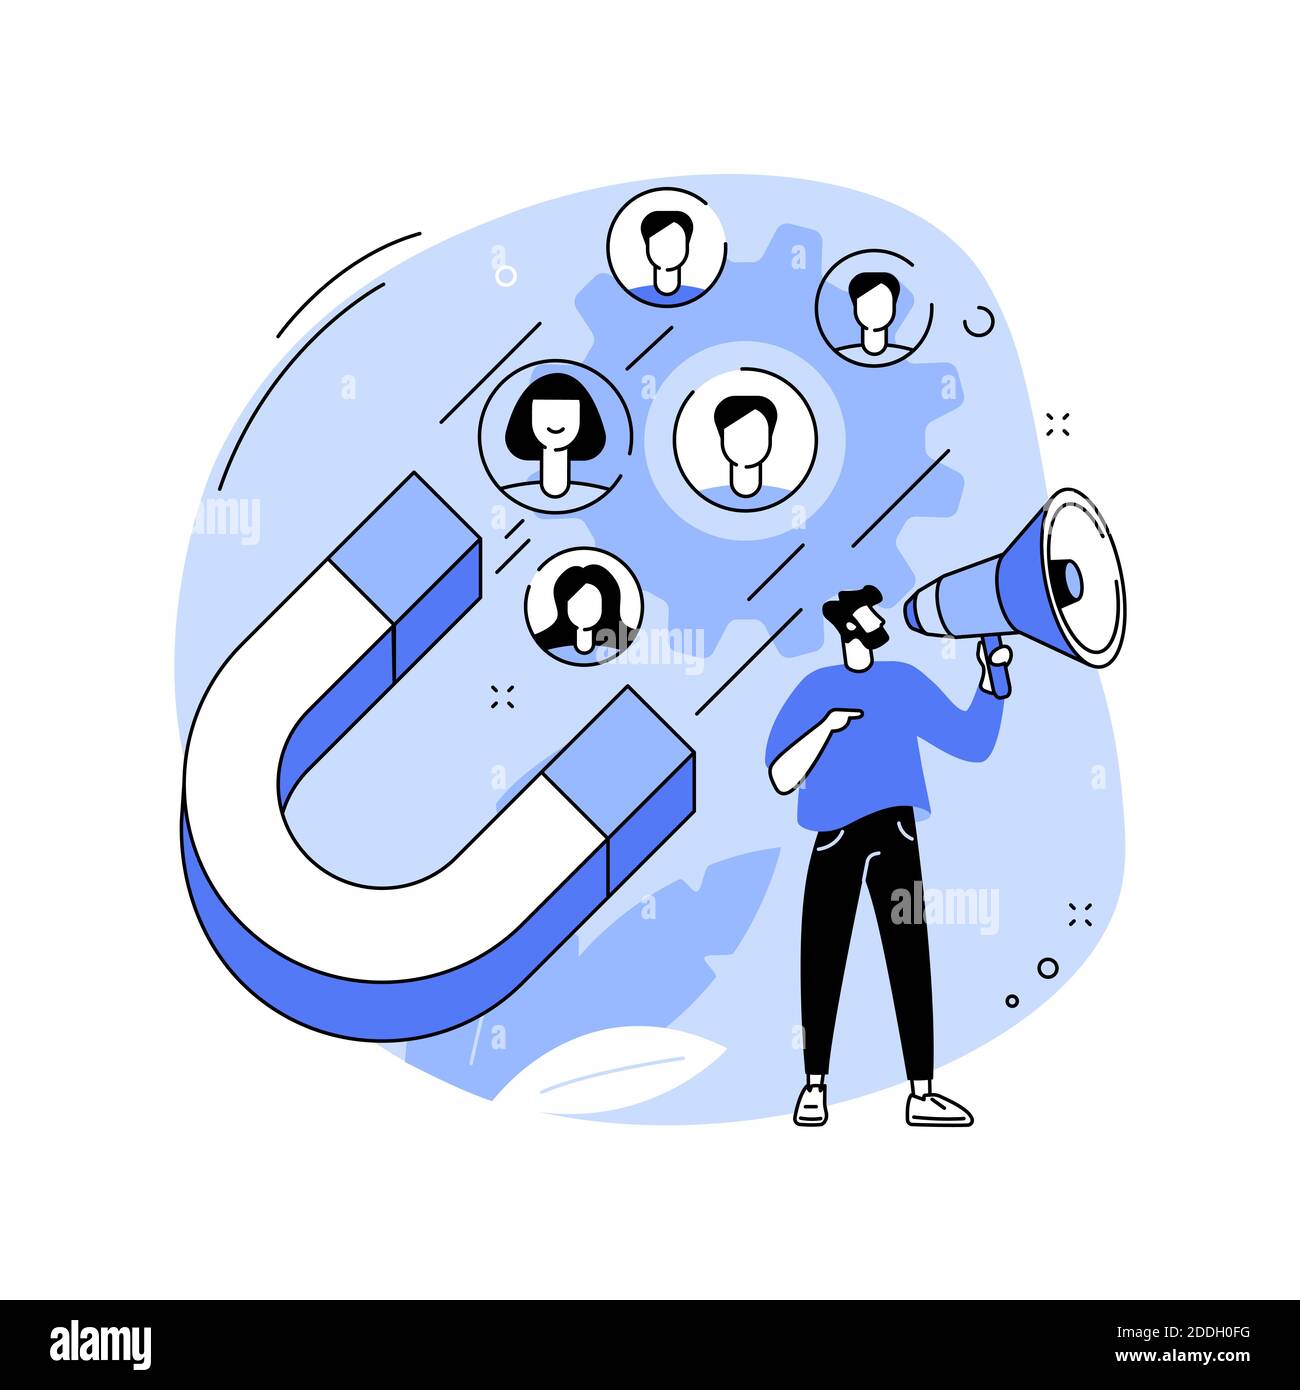 Find leads abstract concept vector illustration. Stock Vector